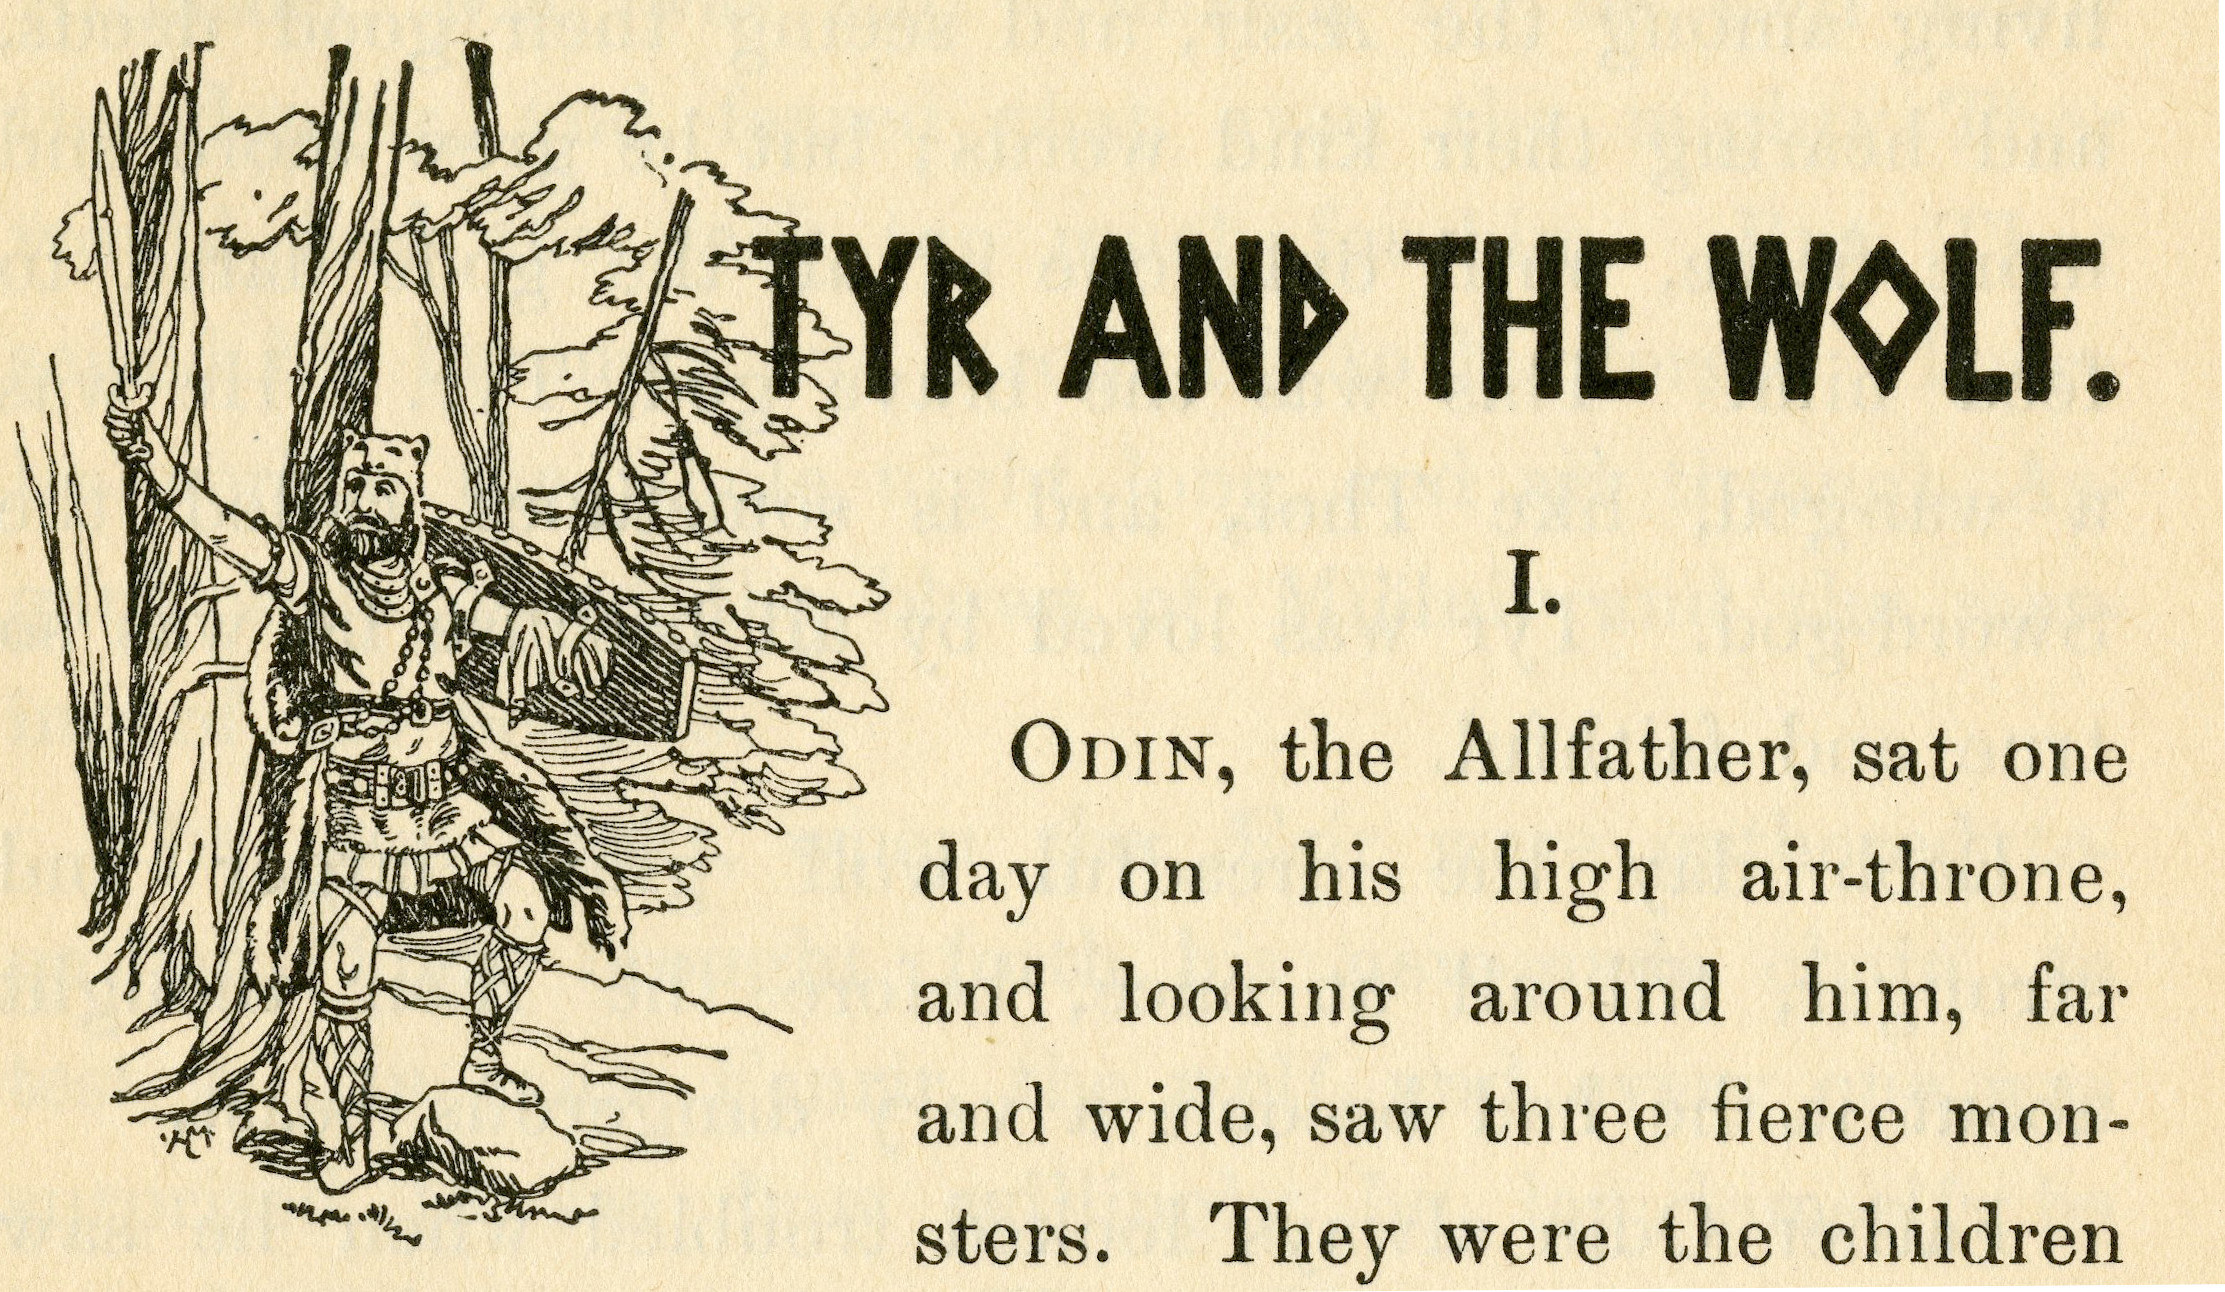 Illustrated Title Header for "Tyr and the
                                Wolf"